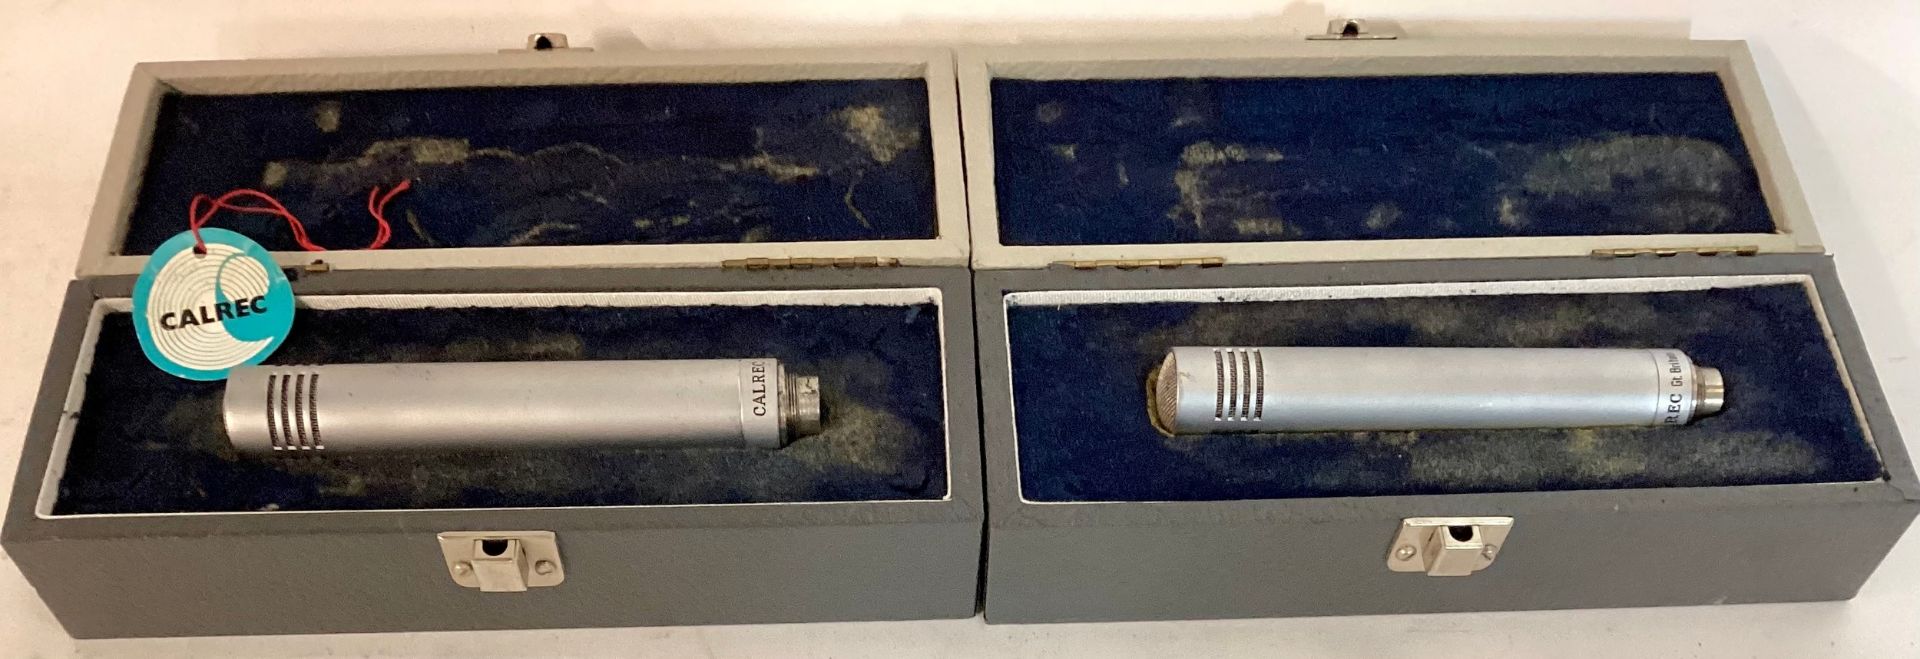 CALREC VINTAGE MICROPHONES X 2. Here we have 2 CALREC CM 652 microphones in original boxes. They are